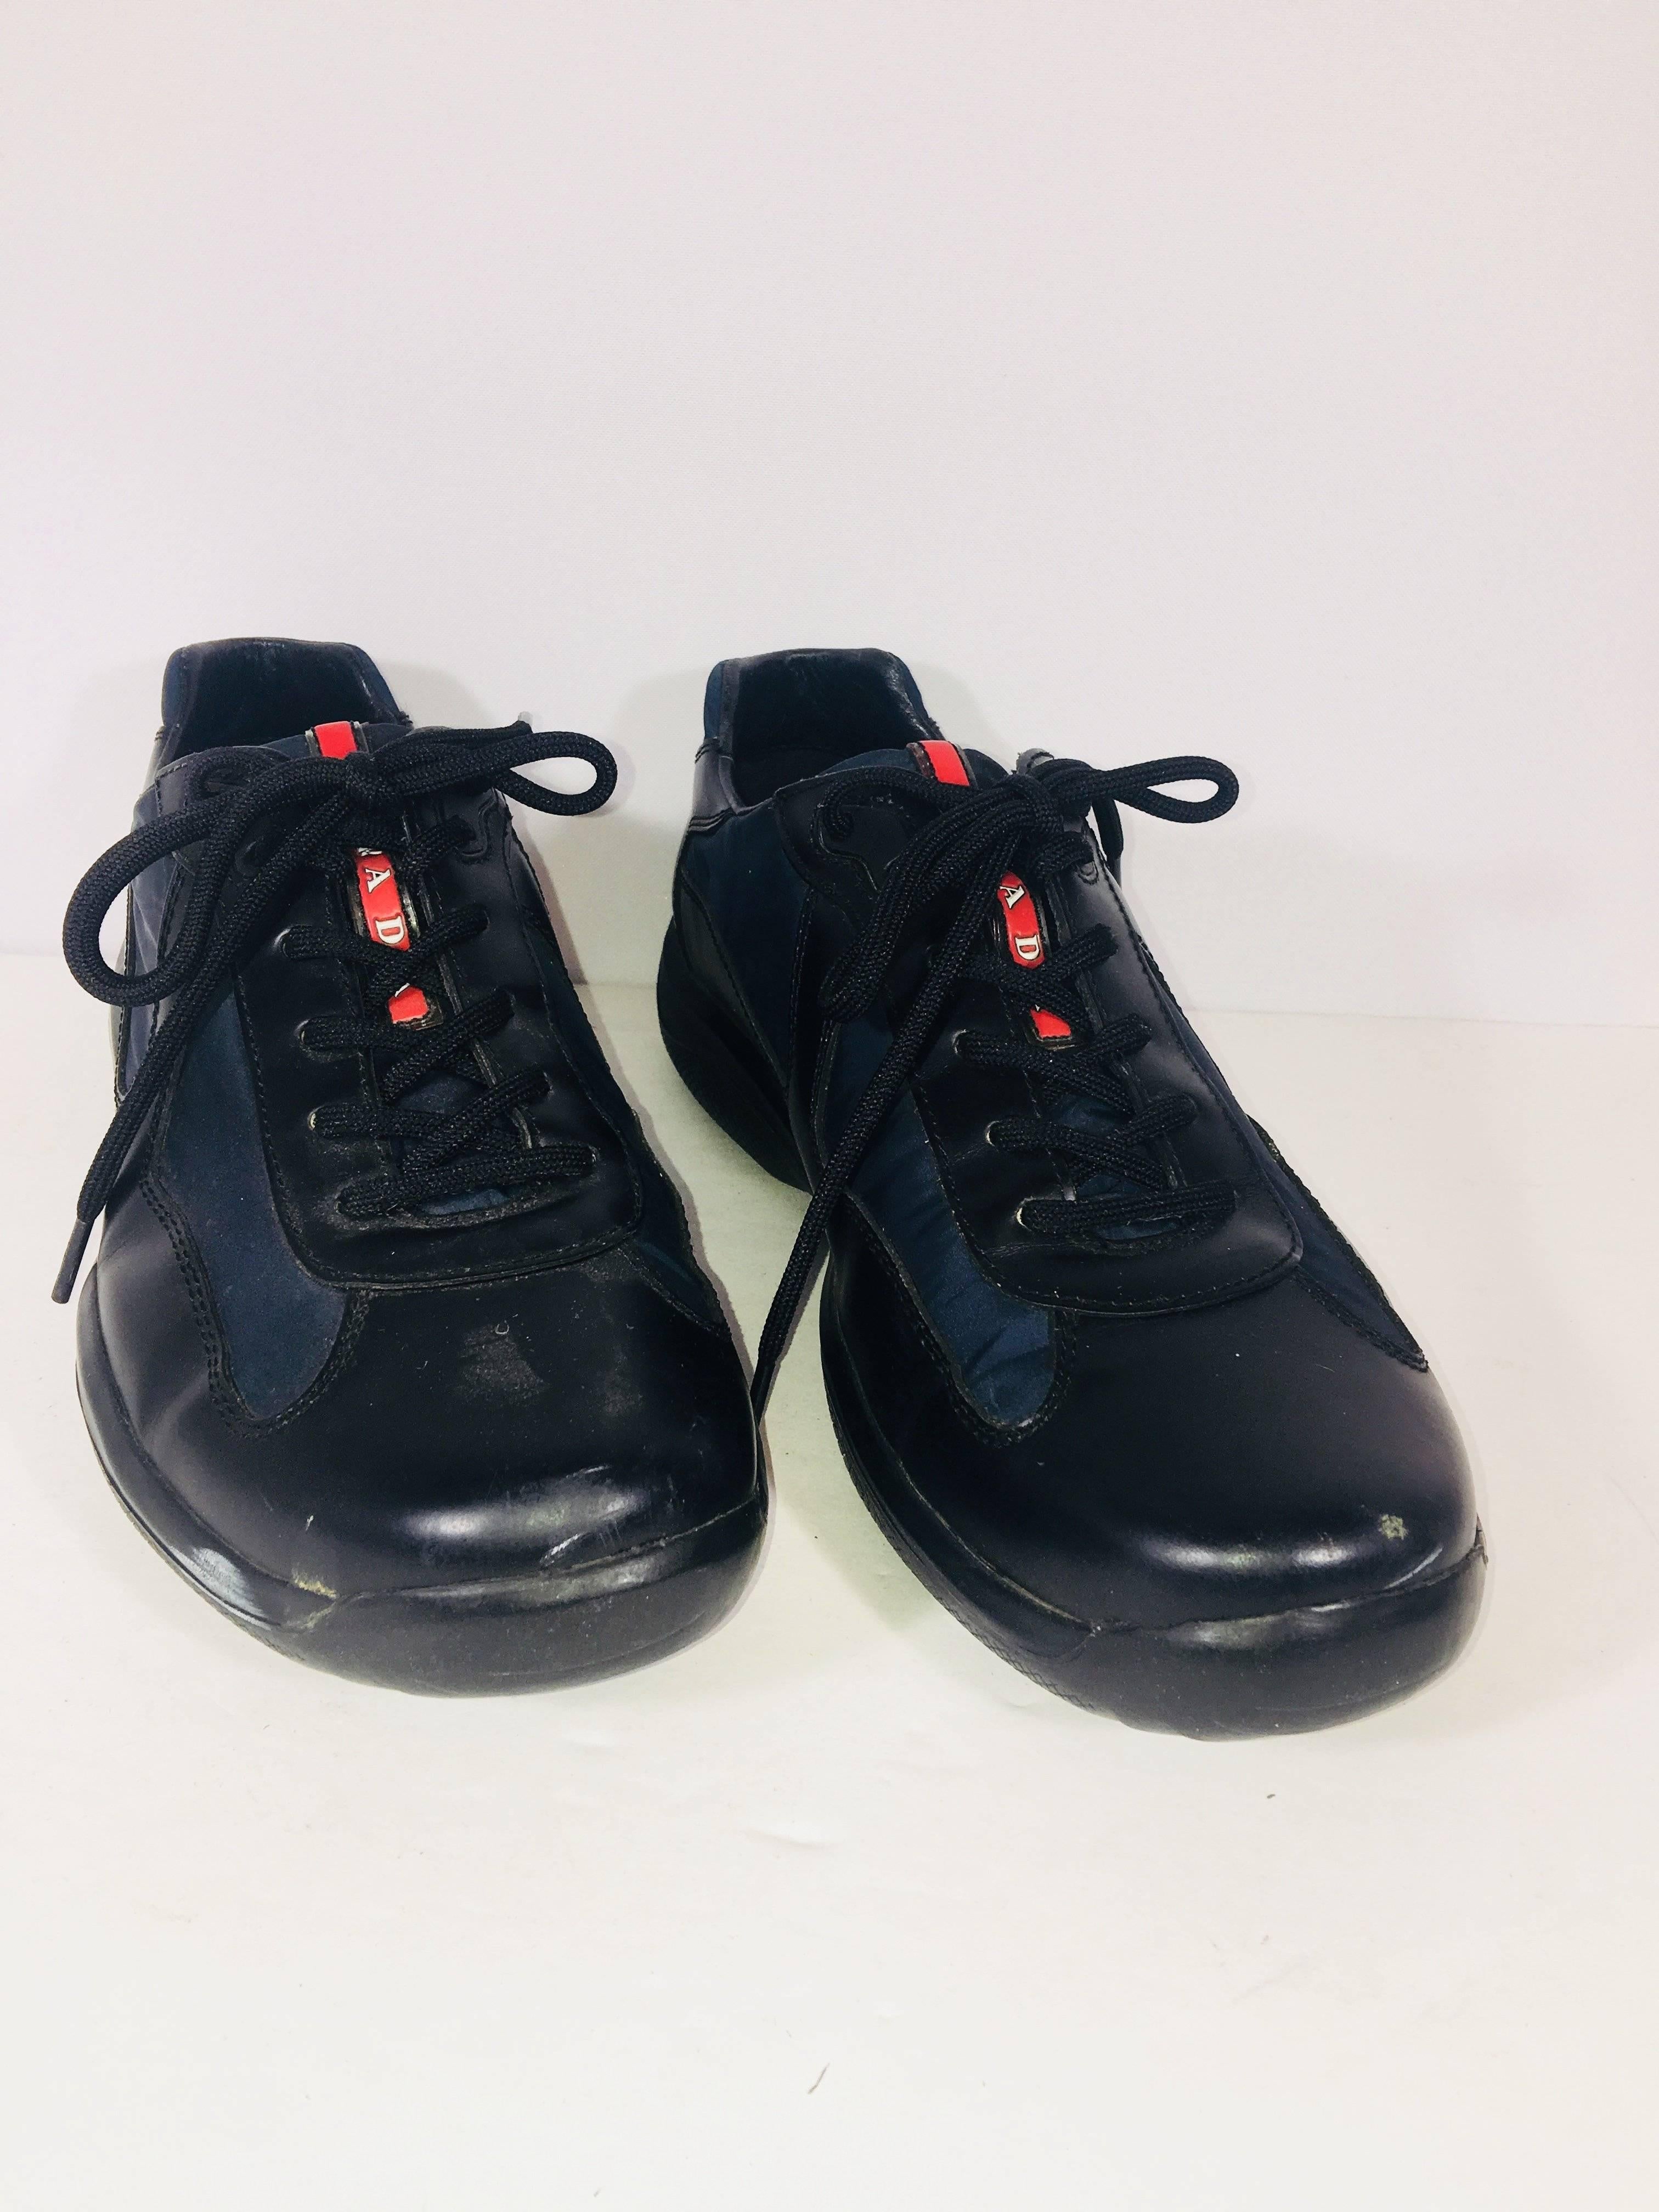 Men's Prada American Cup Low-Top Sneakers in Black Leather with Blue Panels